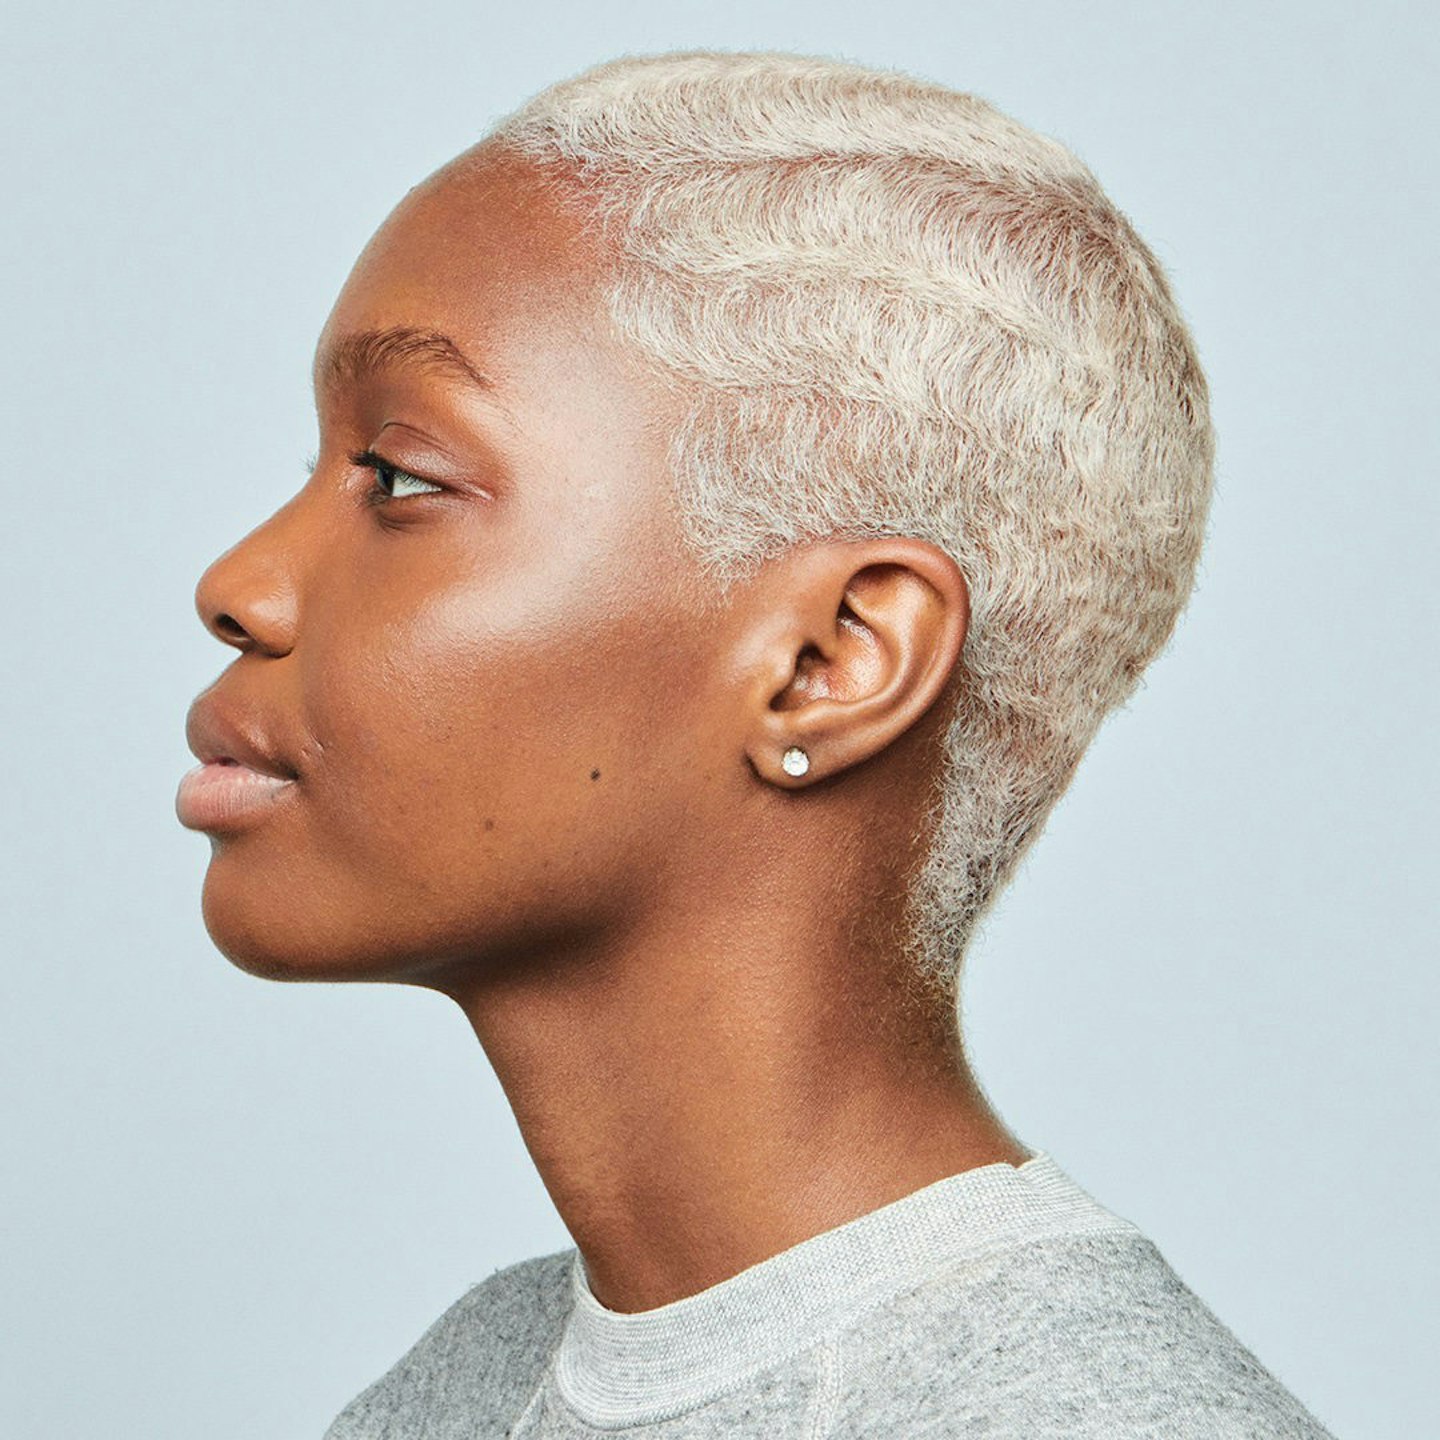 4 Bold And Beautiful Short Relaxed Cuts You Should Try – ORS Hair Care ®